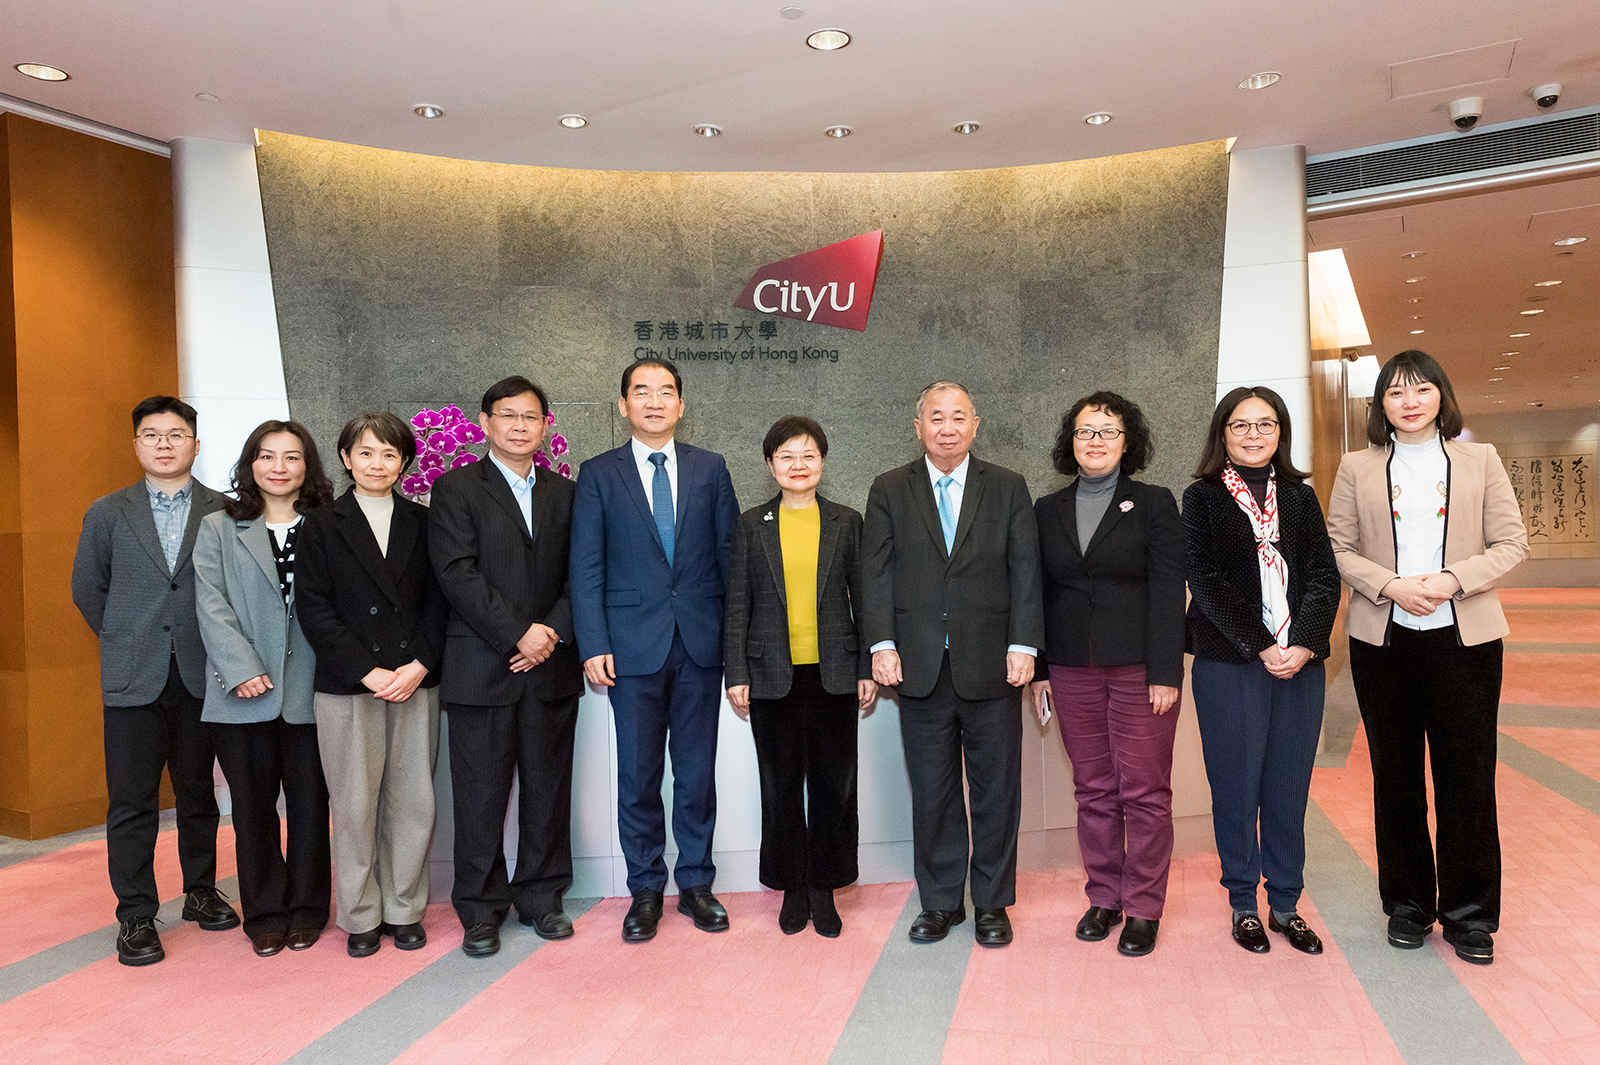 CityUHK senior management, including President Freddy Boey (fourth from right), receive the delegation led by Mr Wang Yueqin (fifth from right), Director General of the Department of Science and Technology of Guangdong Province.